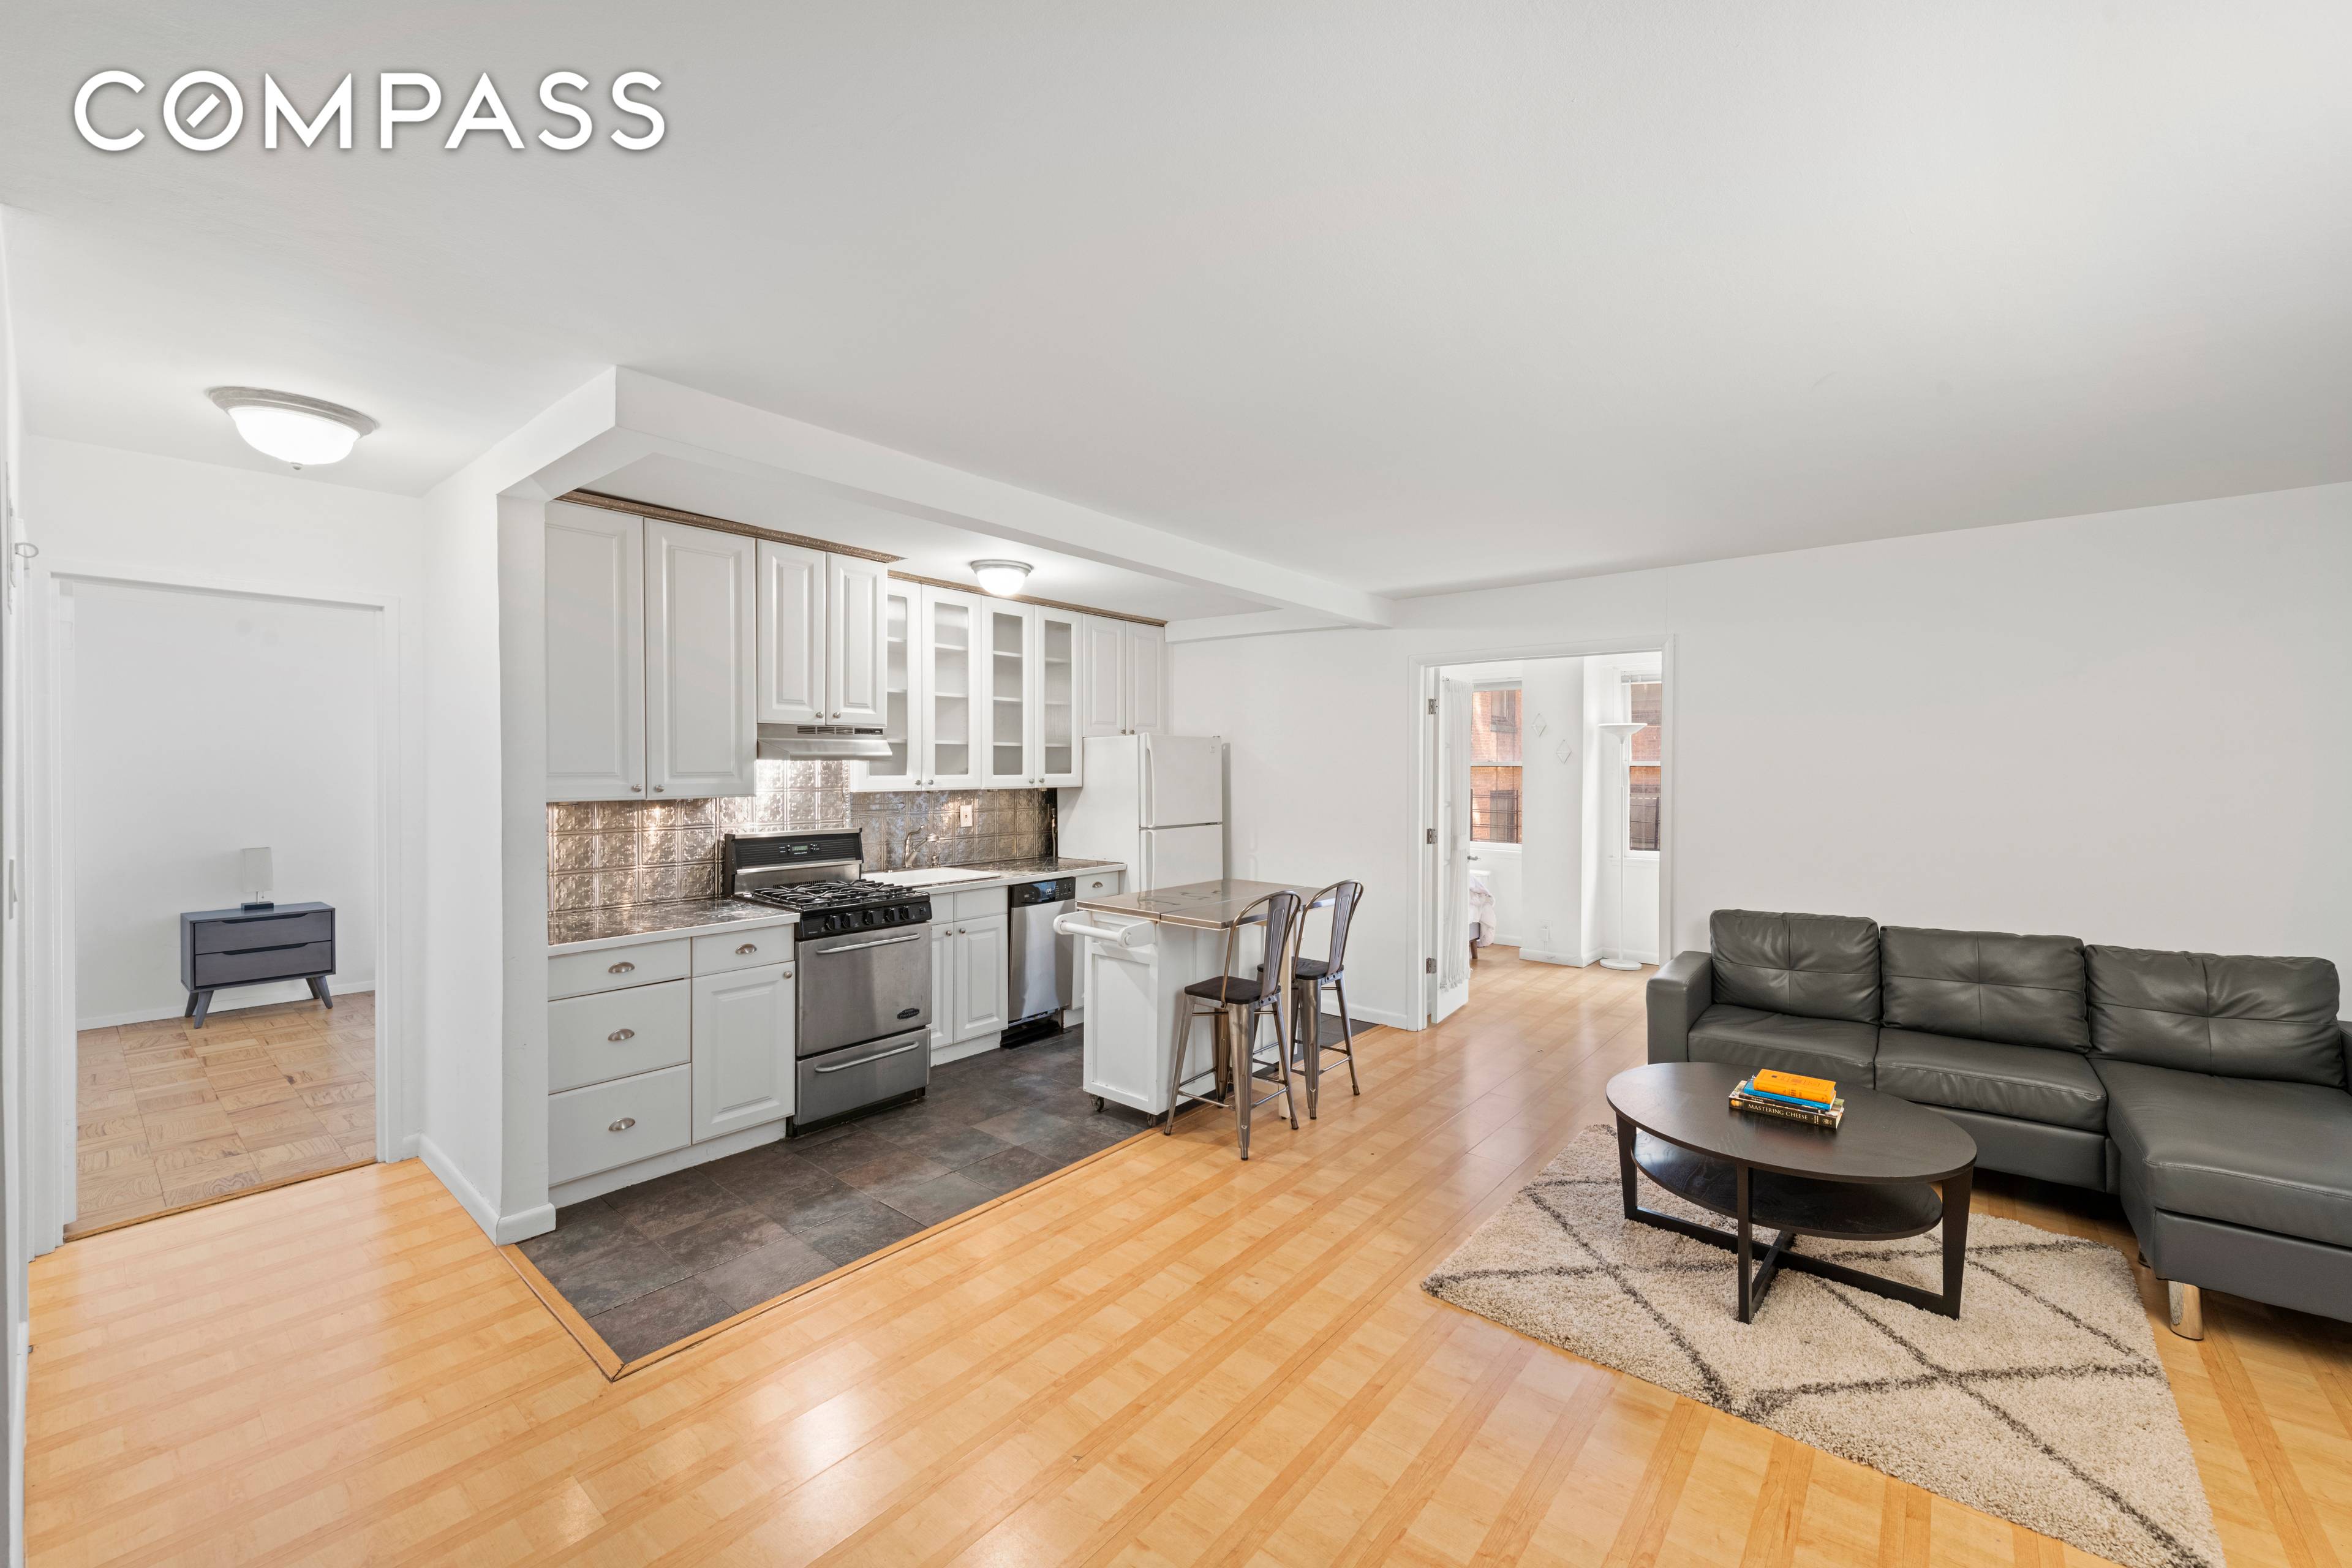 ALL SHOWINGS ARE BY APPOINTMENT ONLY This well proportioned 2 bedroom 1 bath condo is the perfect apartment for both investors and primary residence buyers alike.